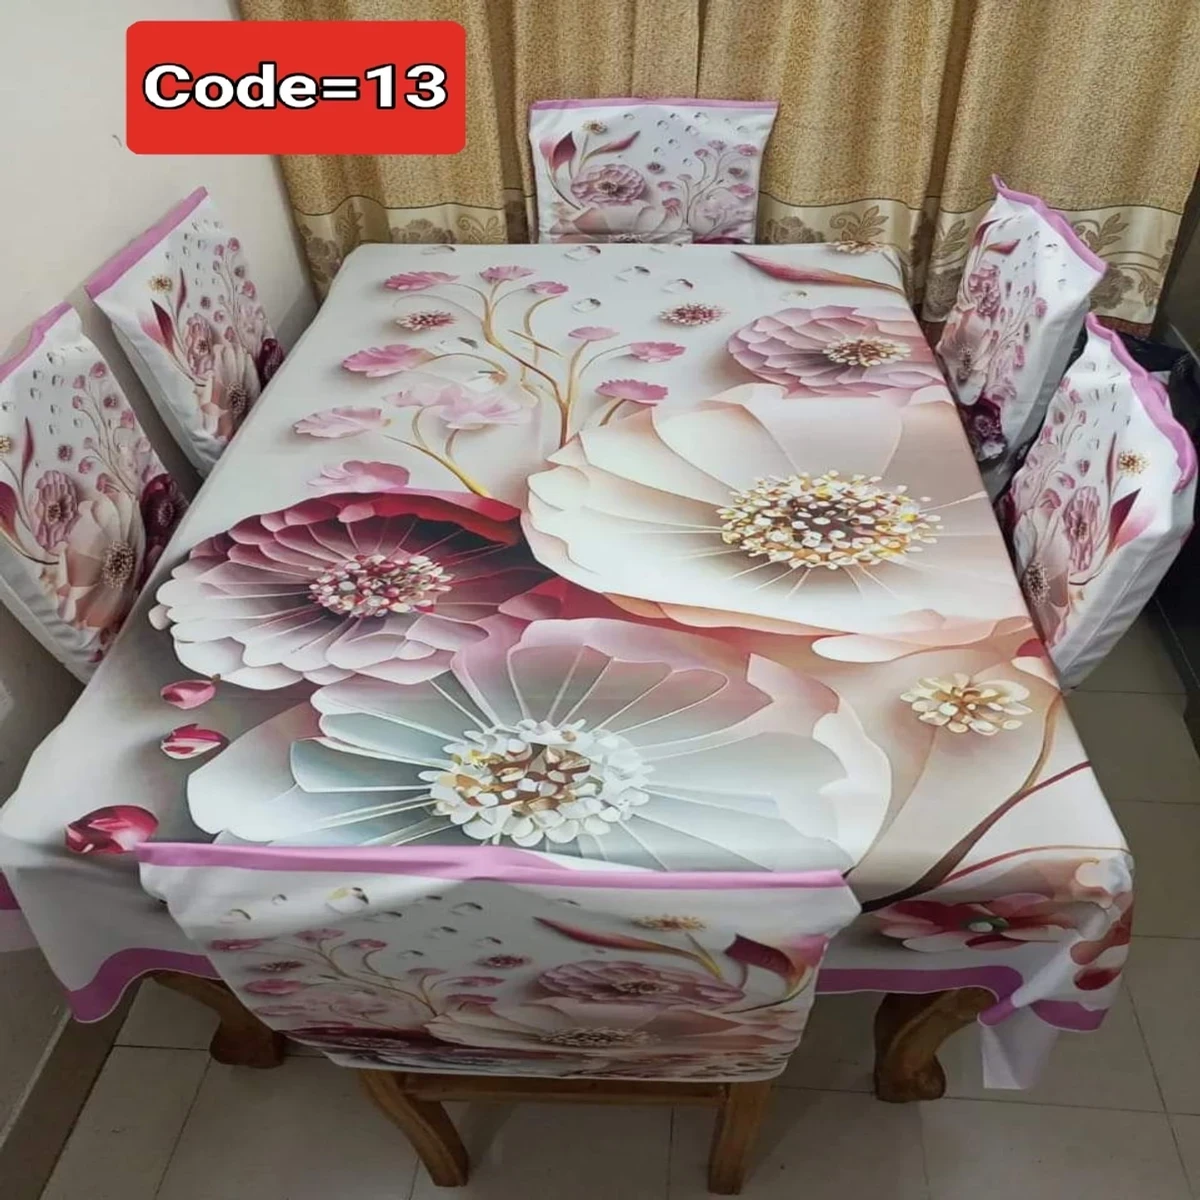 3D Pint Dining Table and Chair Cover Code = 13